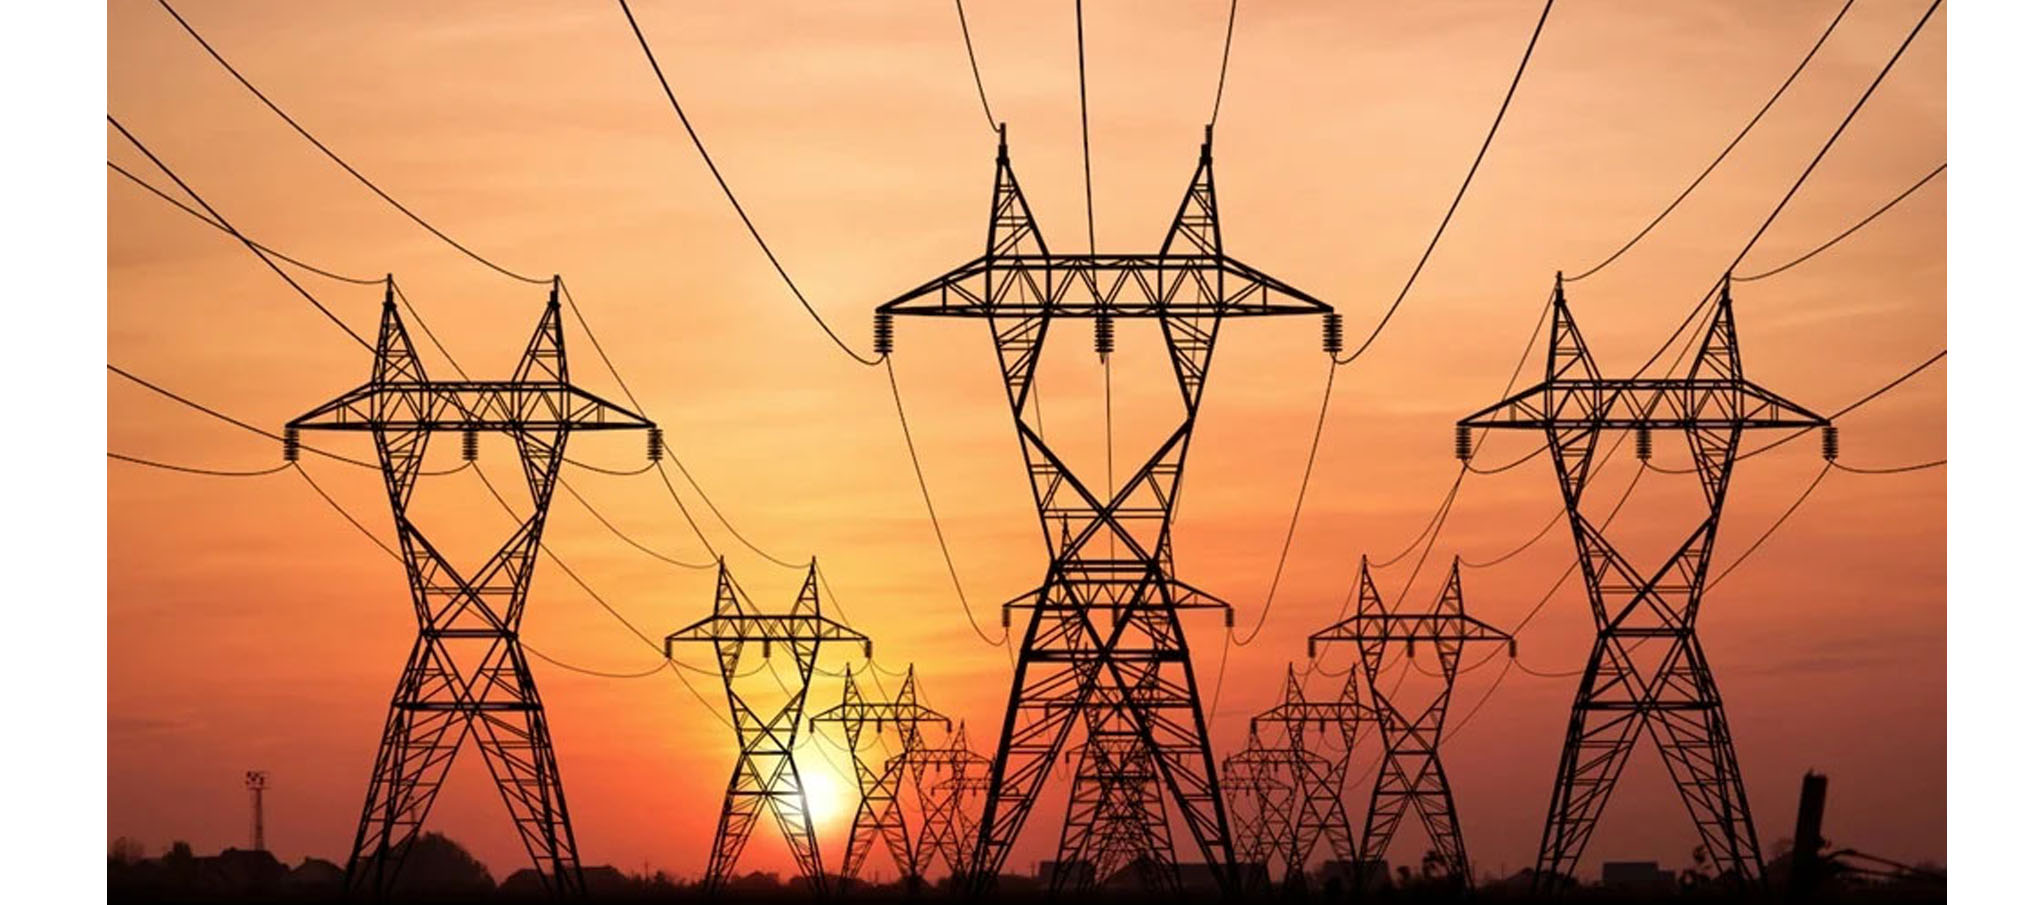 Darkness looming?<br>NamPower and MOF mum on load-shedding